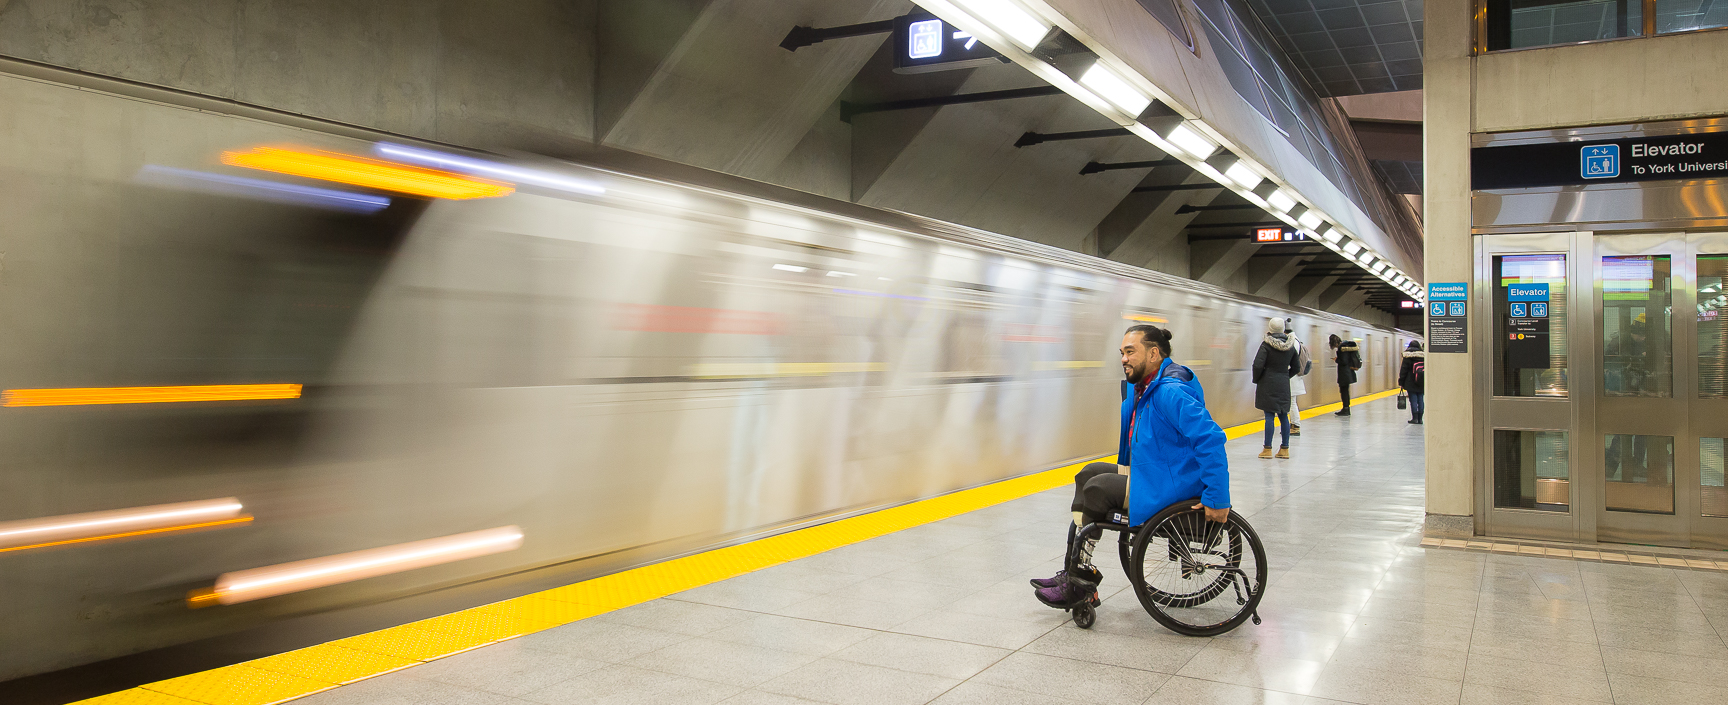 A man with a mobility device waits for the train to stop in the station before he boards.